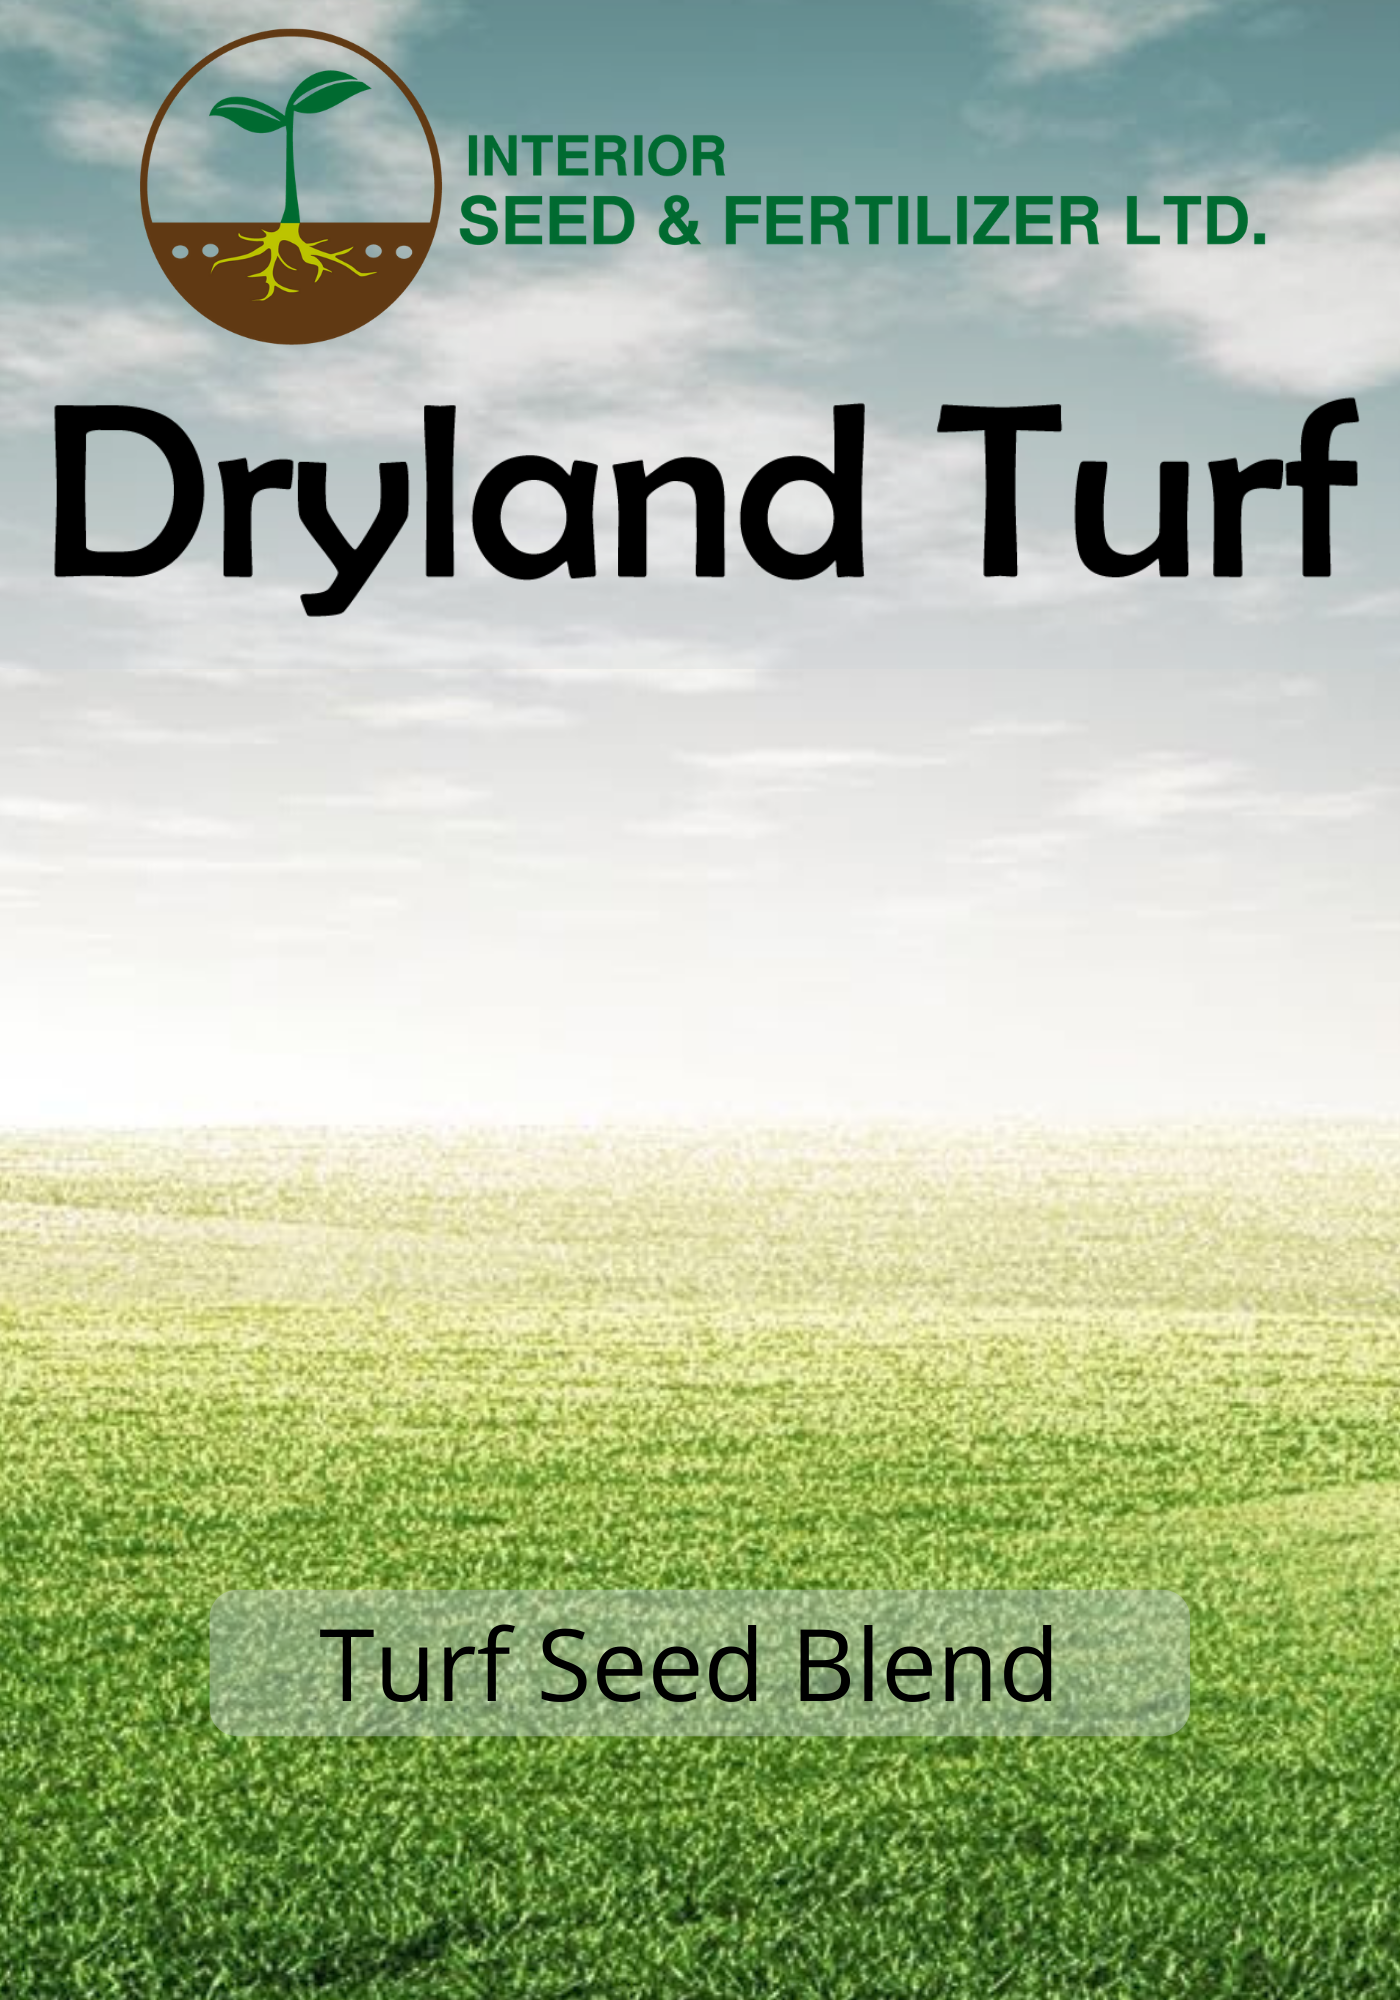 Dryland Turf Lawn Seed Blend at Interior Seed and Fertilizer Garden Center Cranbrook, BC